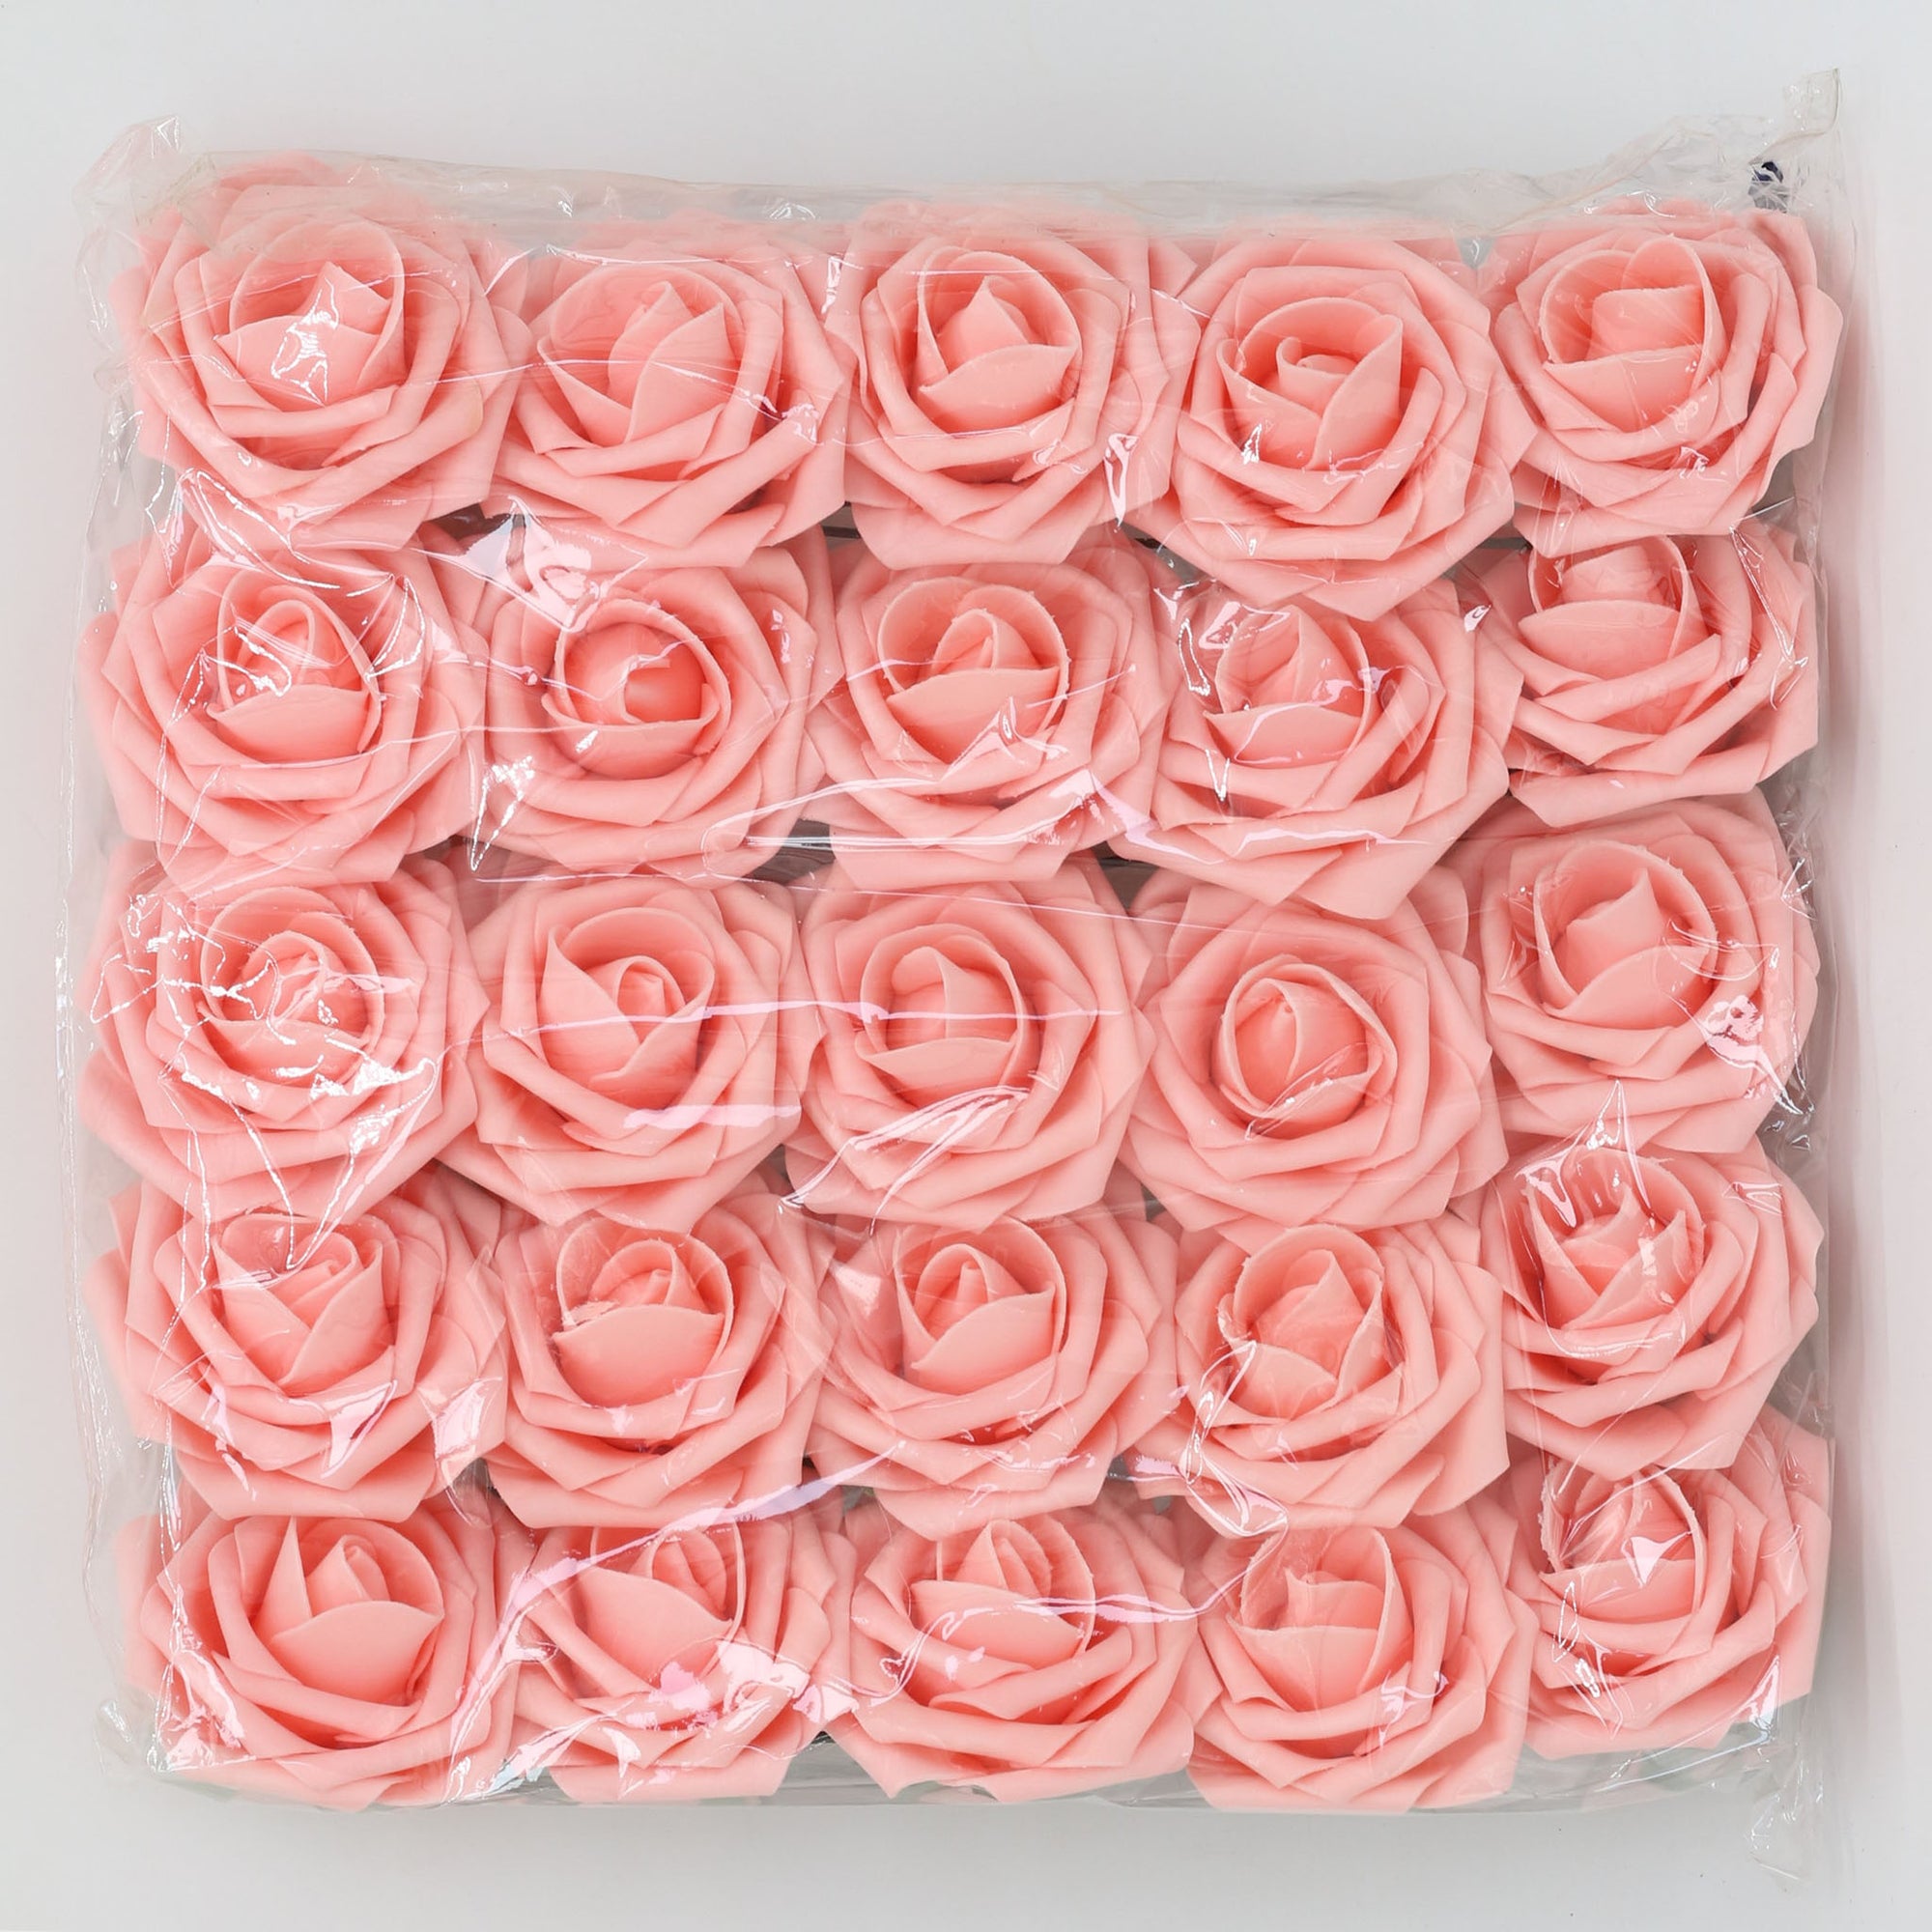 Peach Pink Fake Roses Flowers Bulk for Bride Bouquets